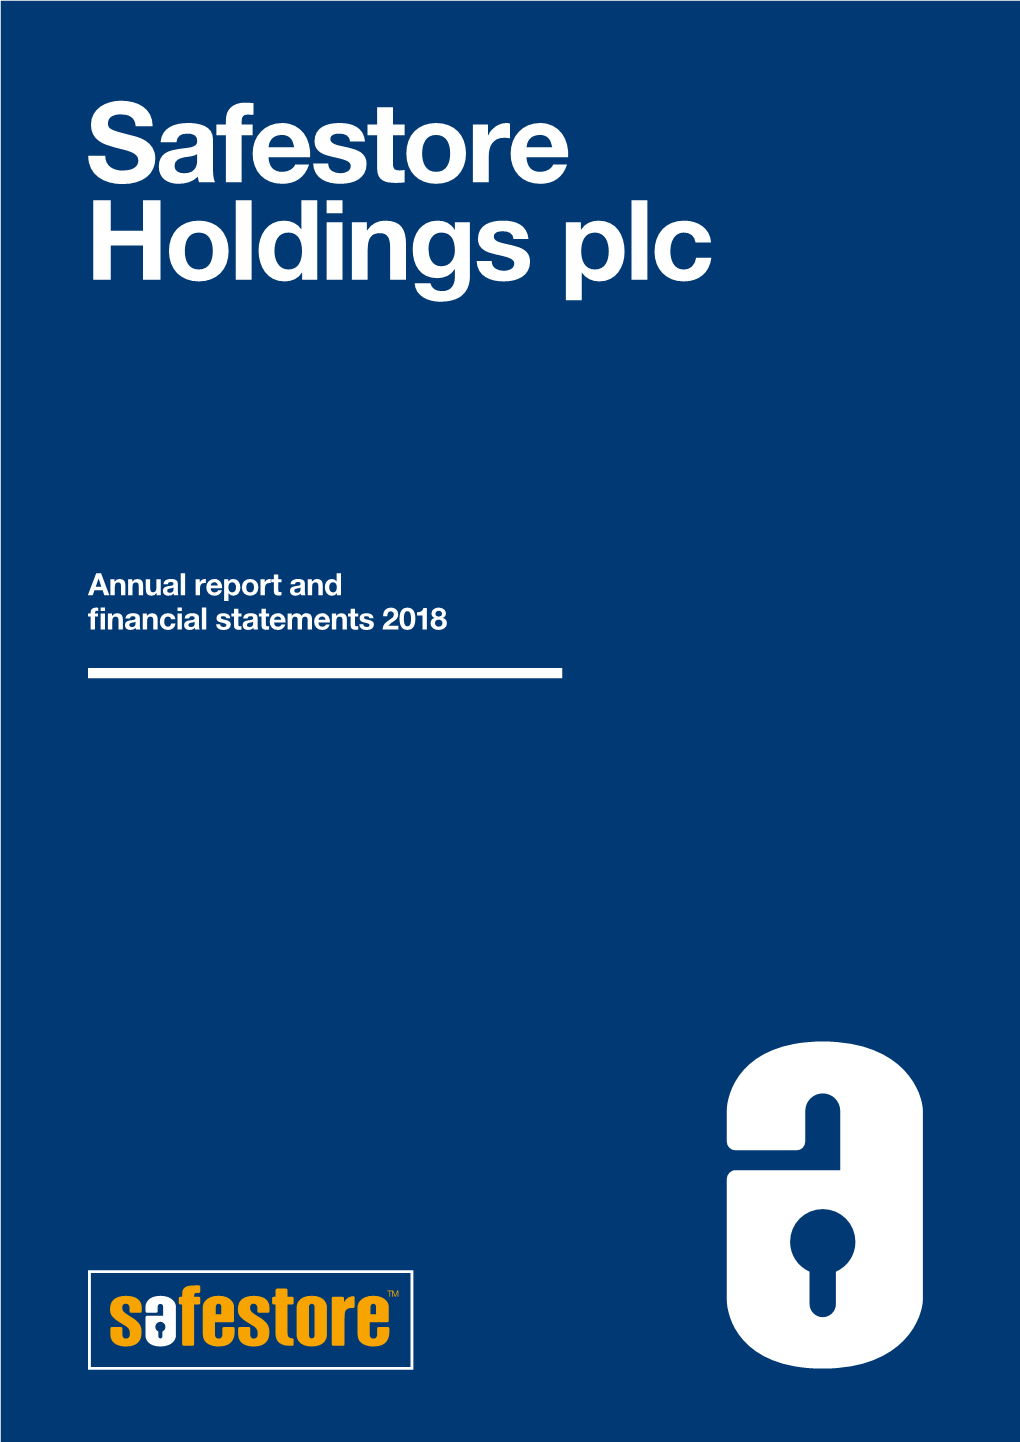 Safestore Holdings Plc Annual Report and Financial Statements 2018 Overview